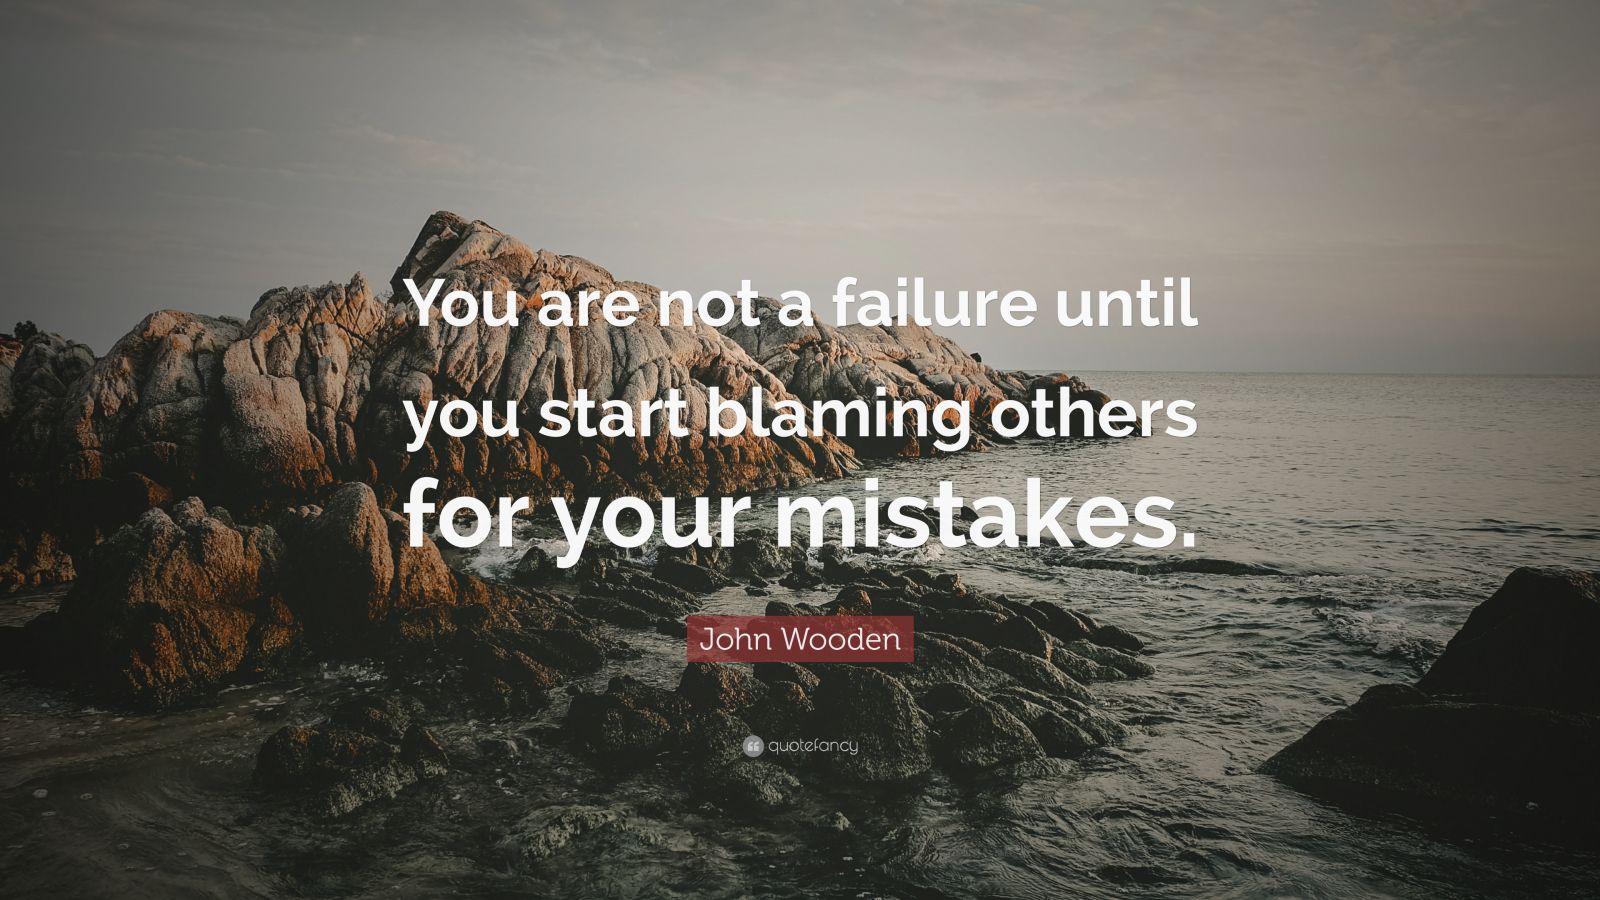 John Wooden Quote: “You are not a failure until you start blaming